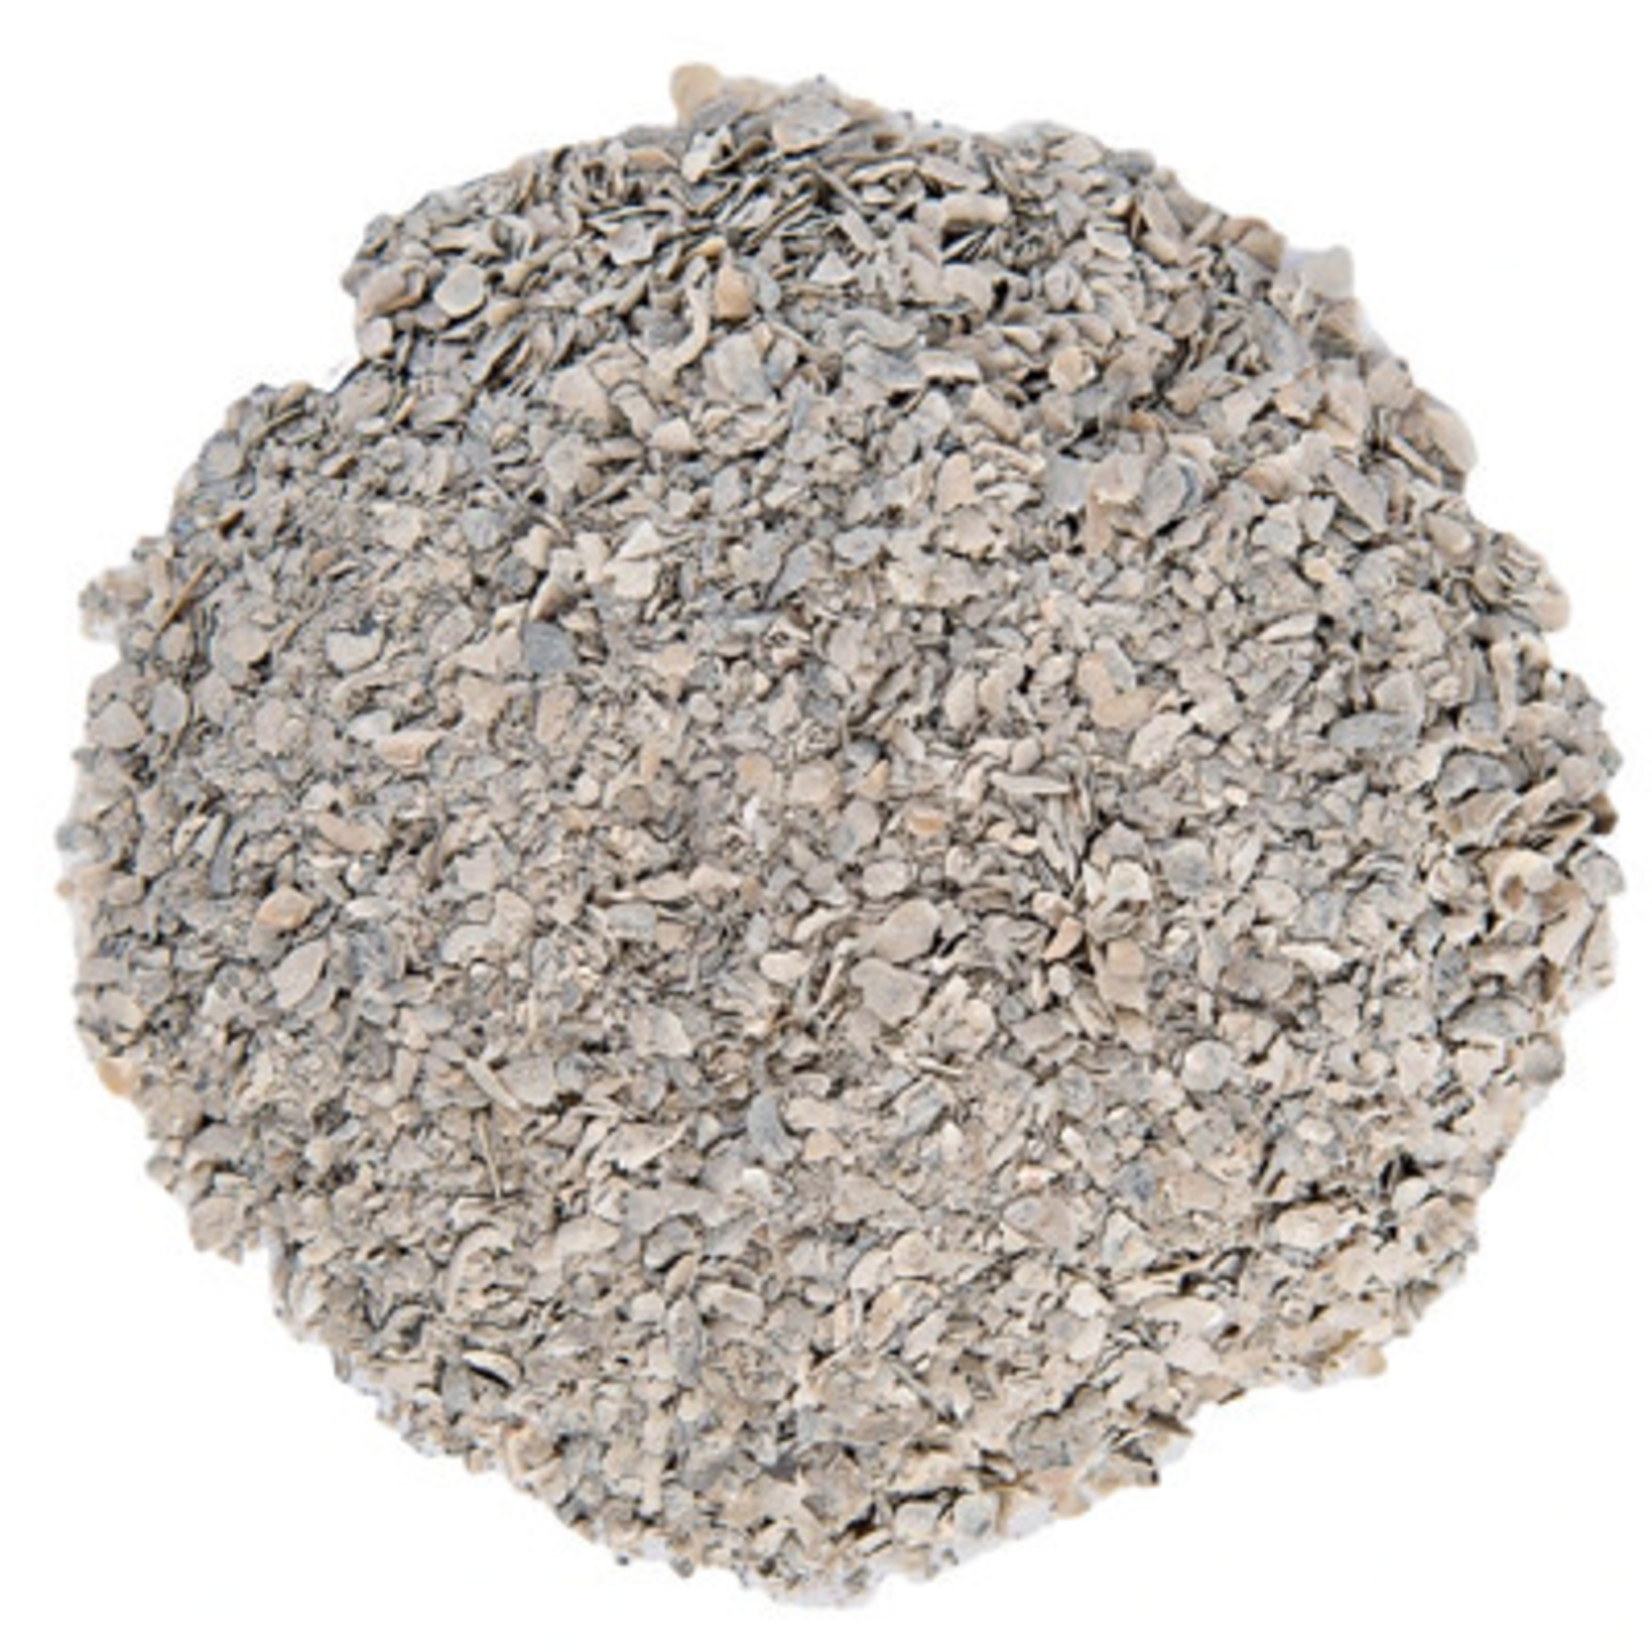 West Lebanon Feed & Supply Oyster Shells 10#